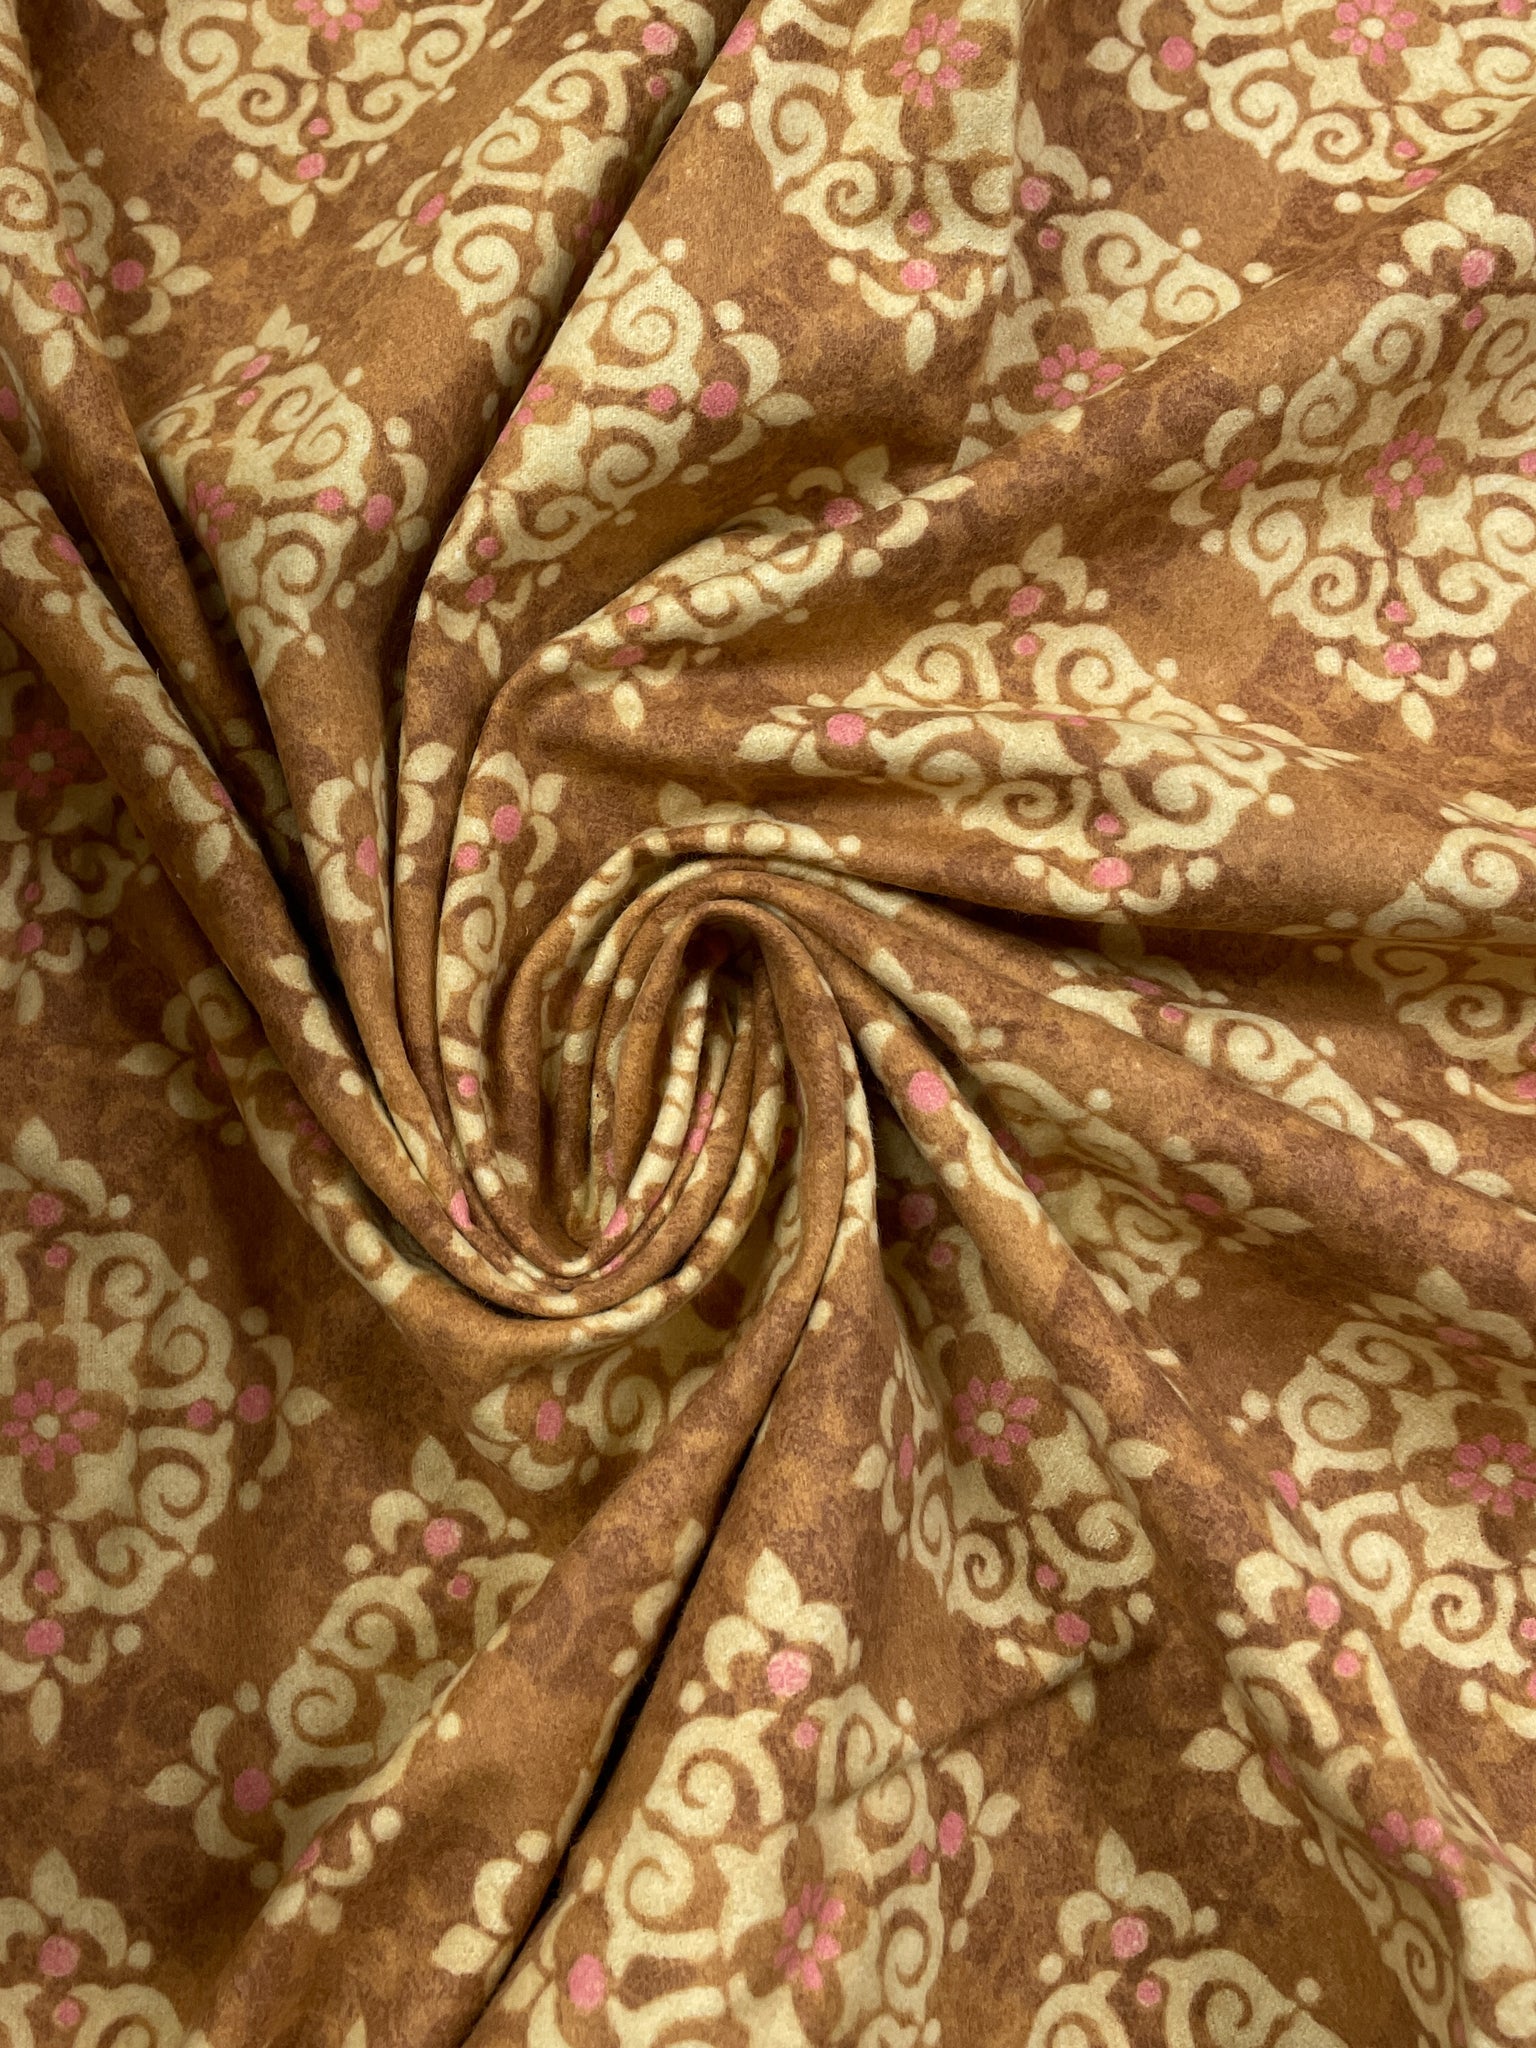 Cotton Flannel - Mottled Tan with Beige and Pink Motifs